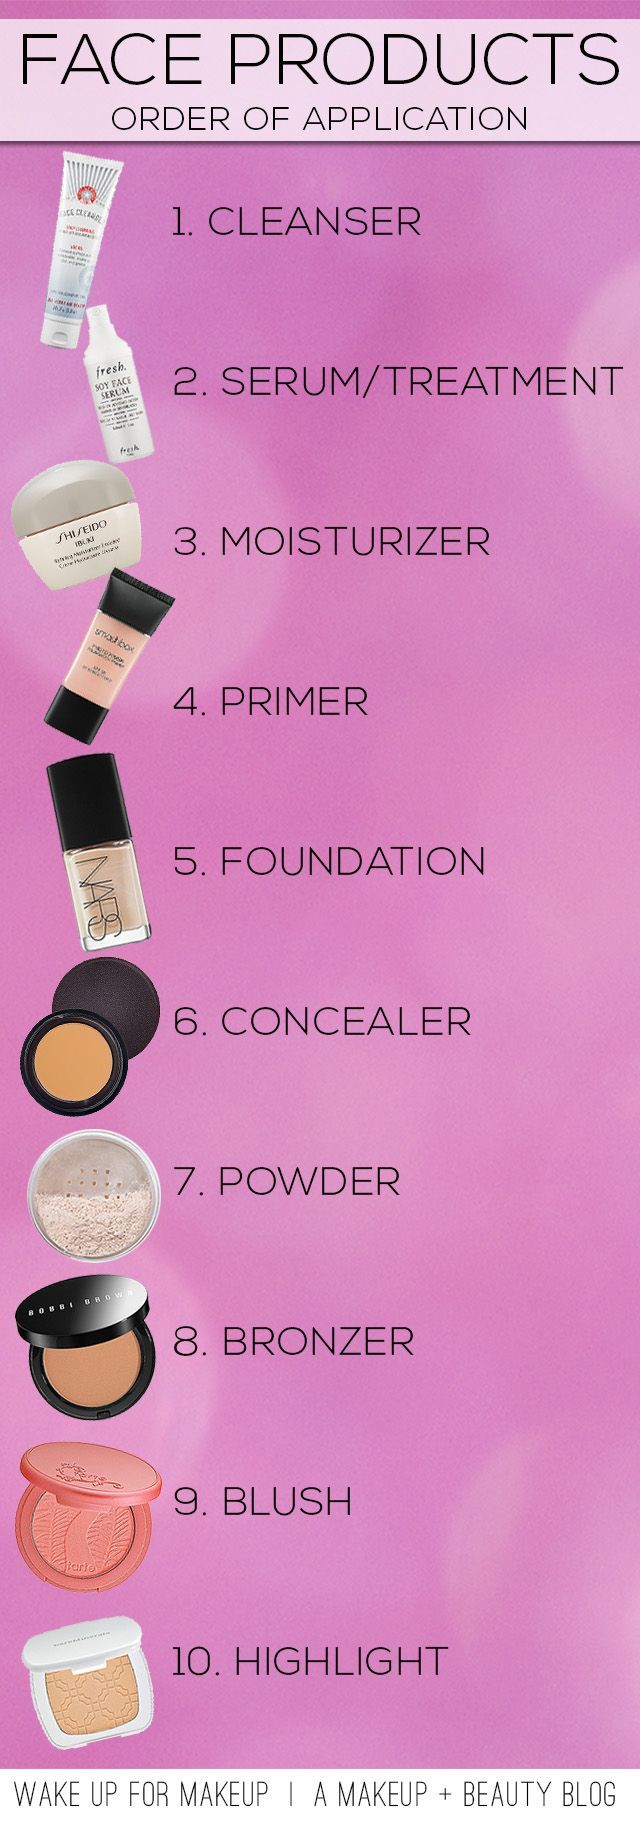 Face Products: Order of Application.